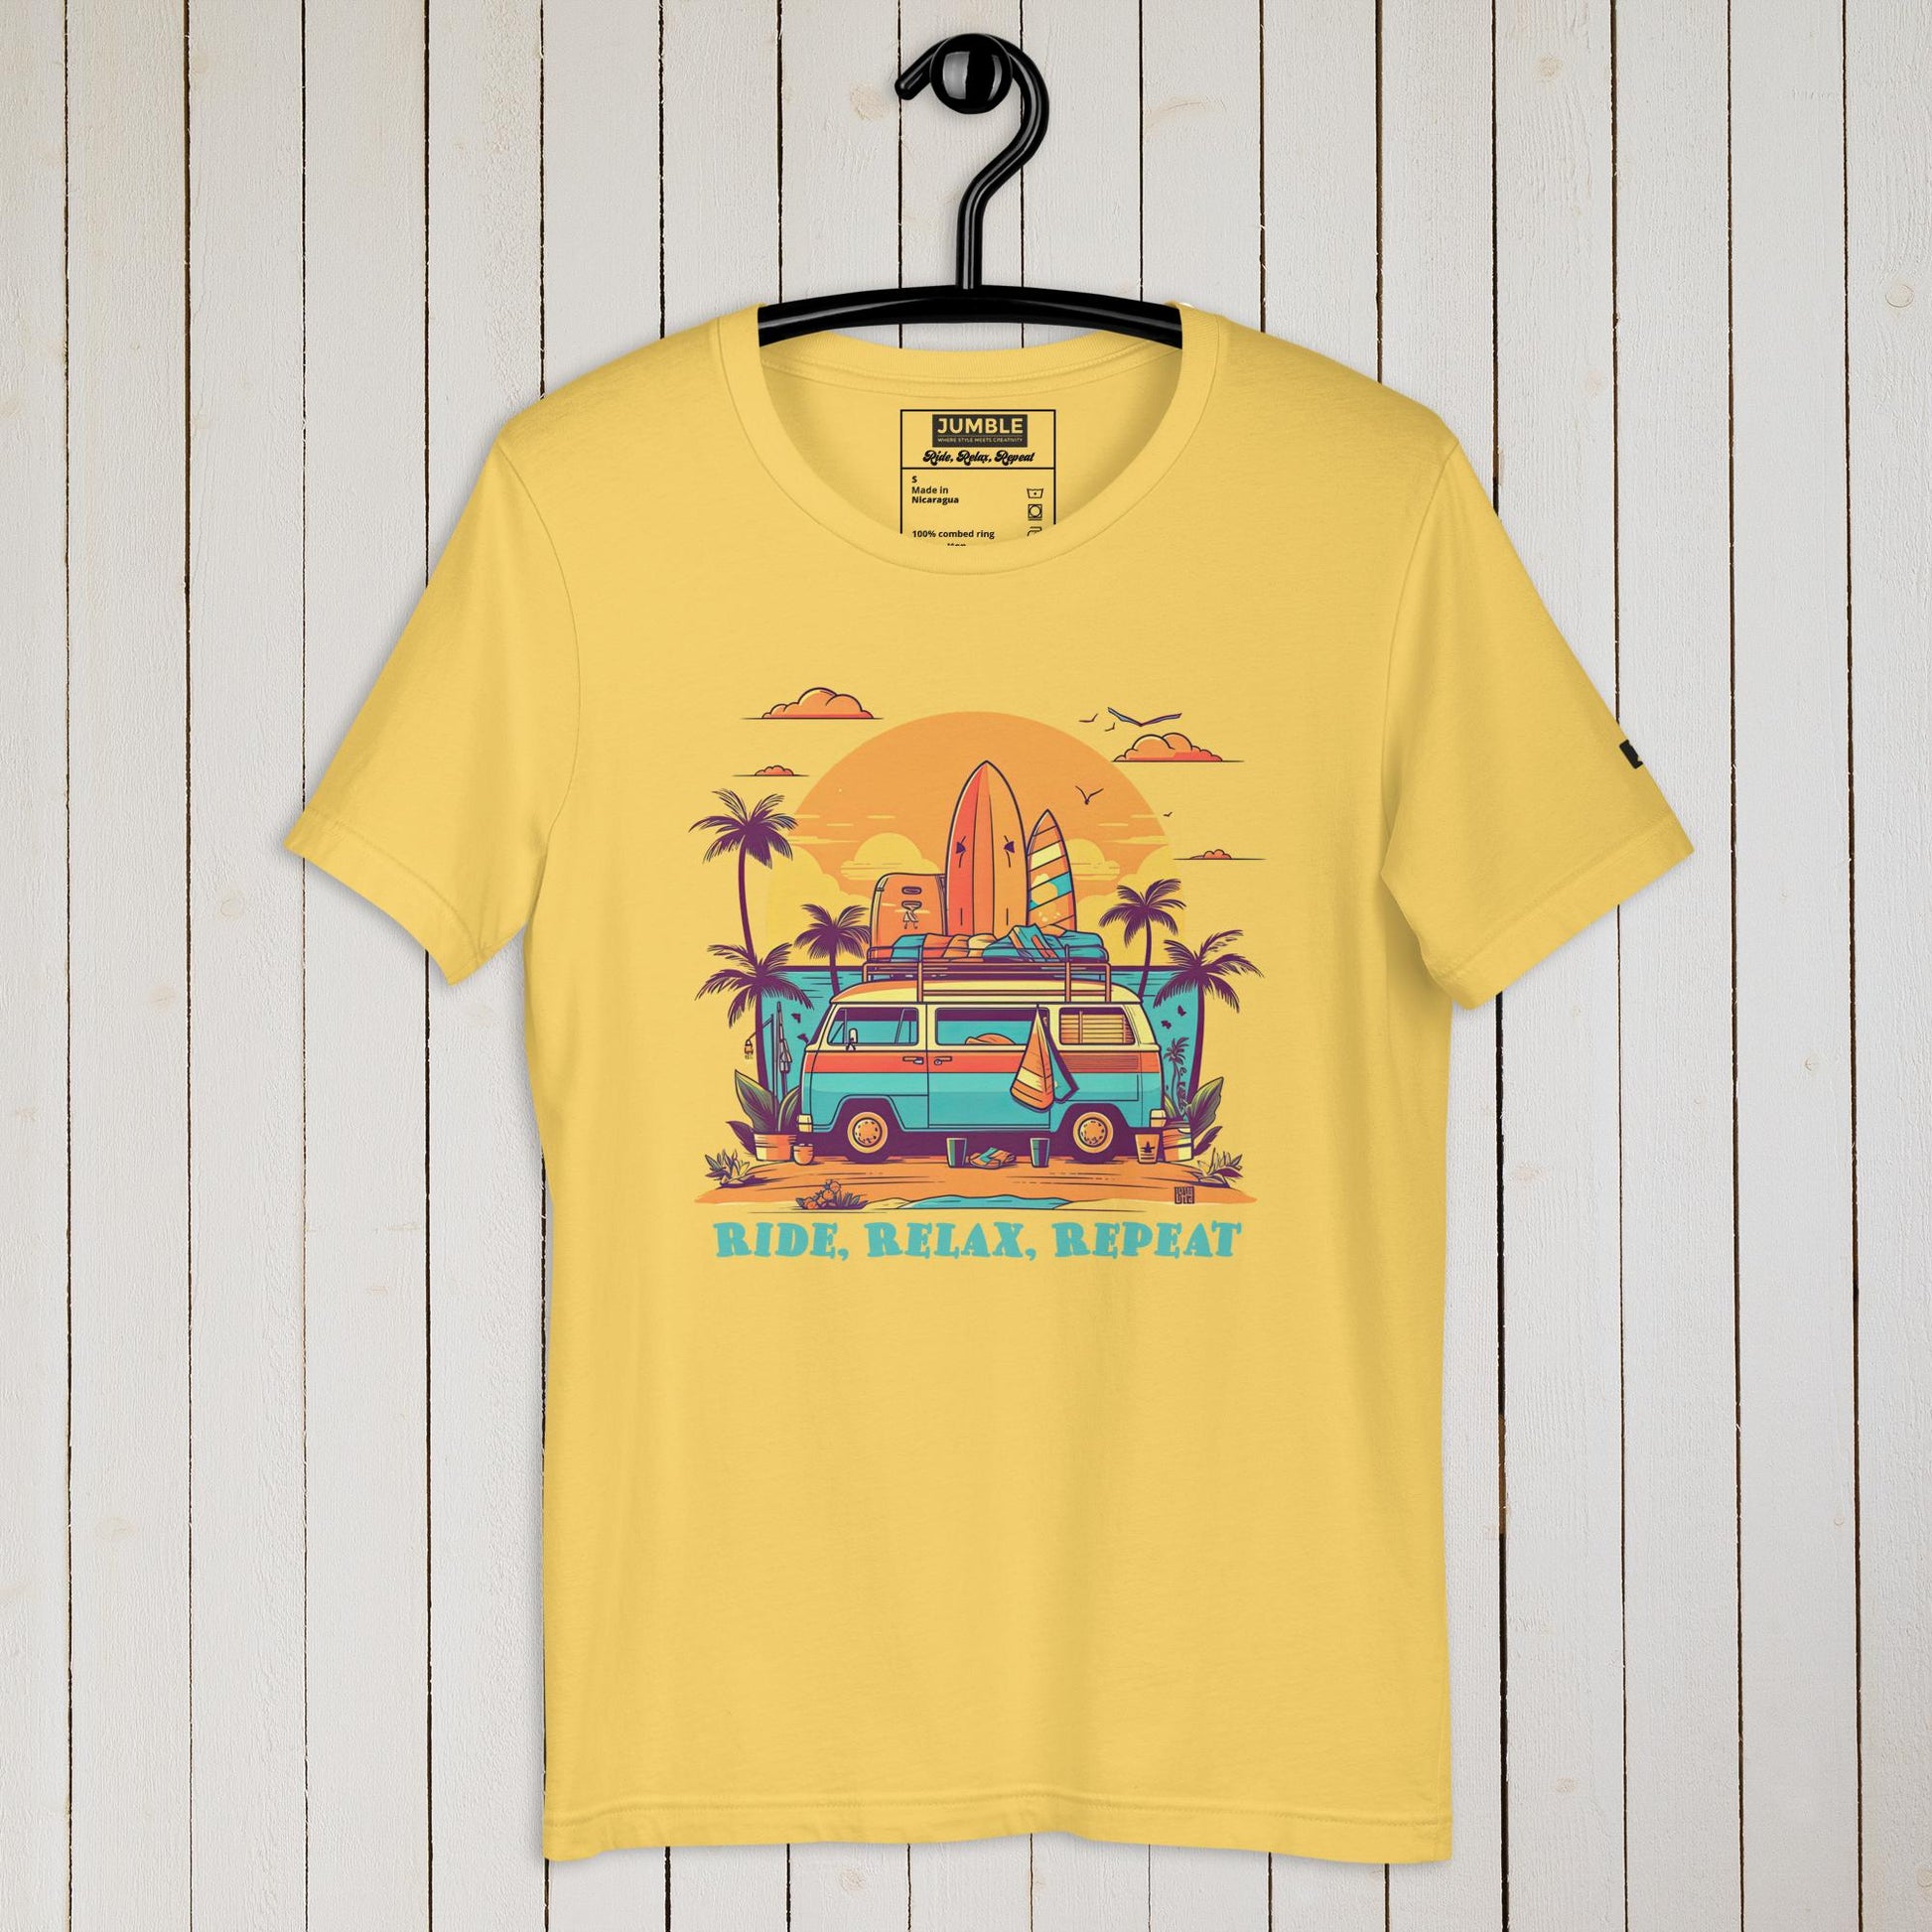 Unisex "Ride, Relax, Repeat" T-Shirt in Yellow - Hanging on a hanger.